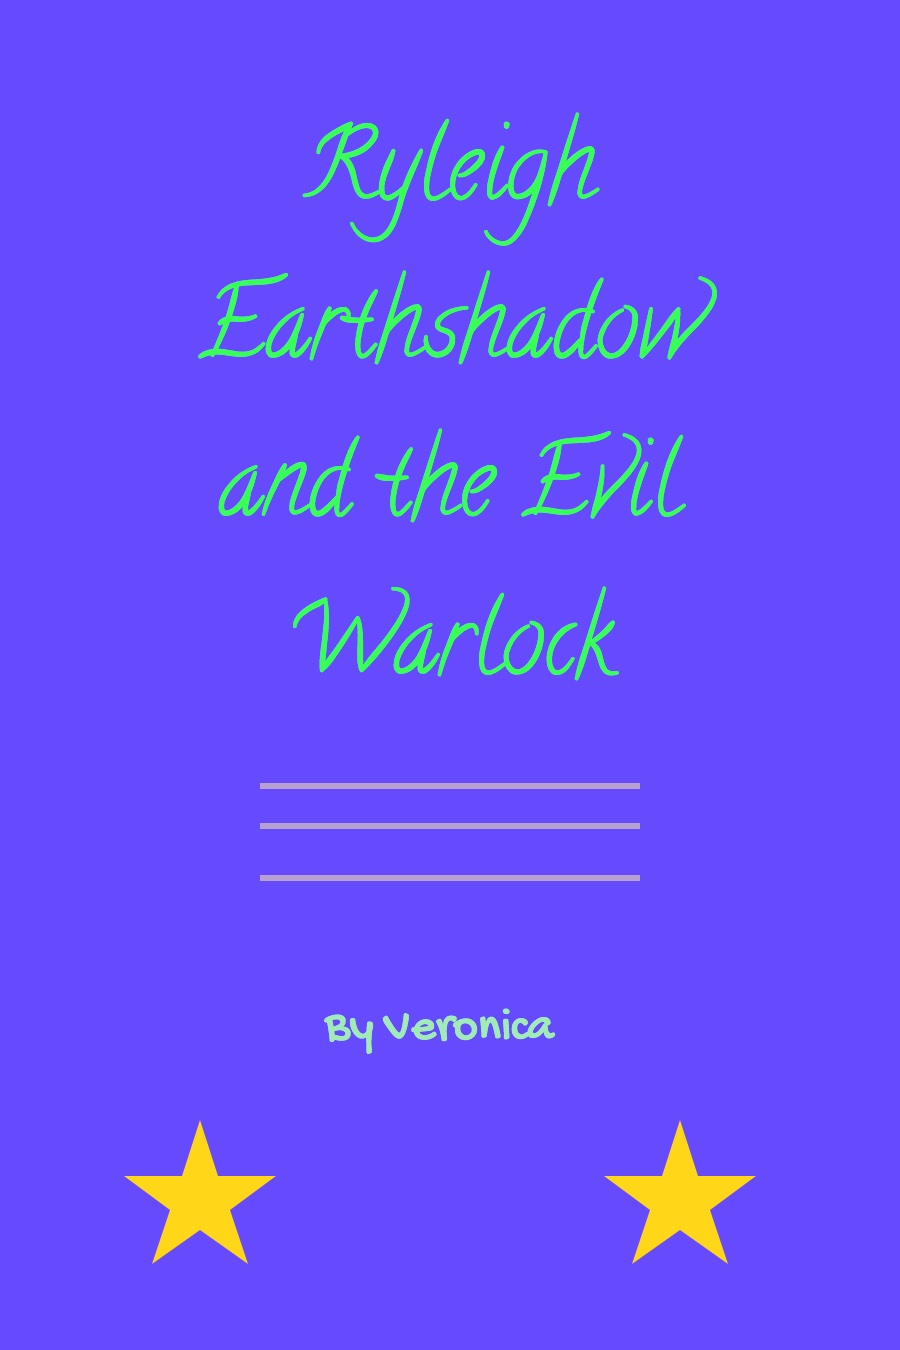 Ryleigh EarthShadow and the Evil Warlock by Veronica V